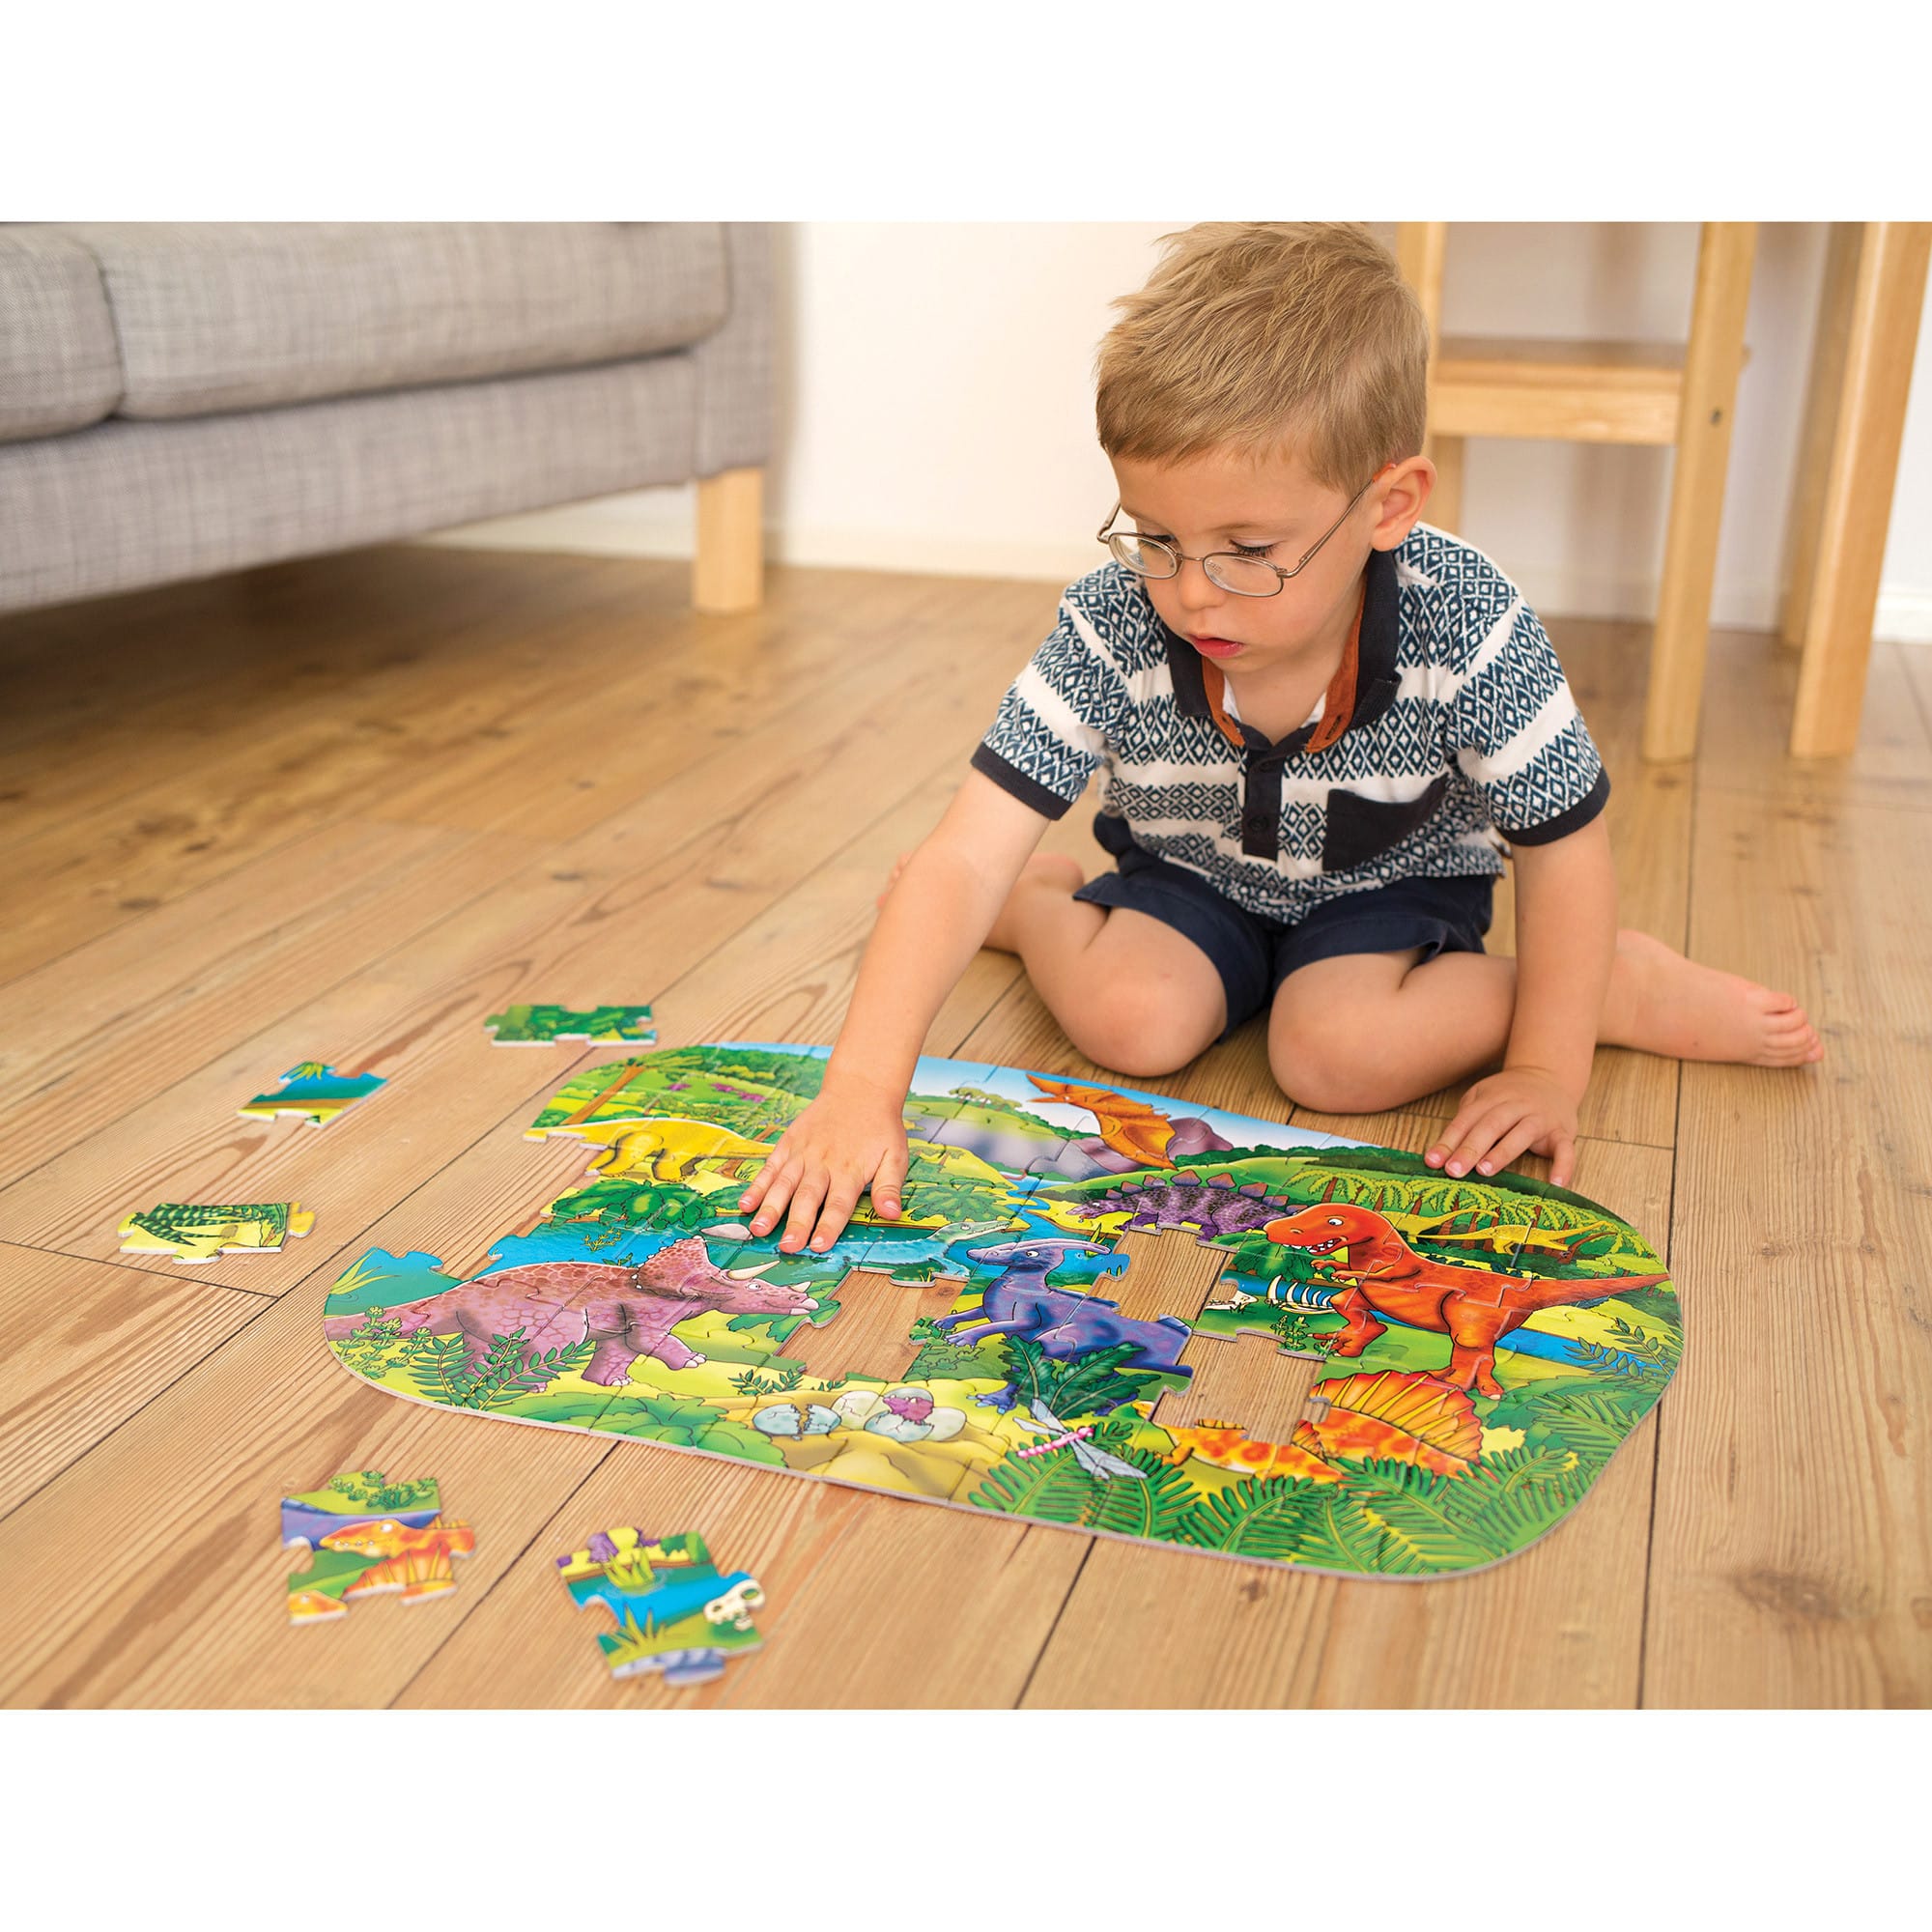 Orchard Toys - Big Dinosaurs Jigsaw Puzzle